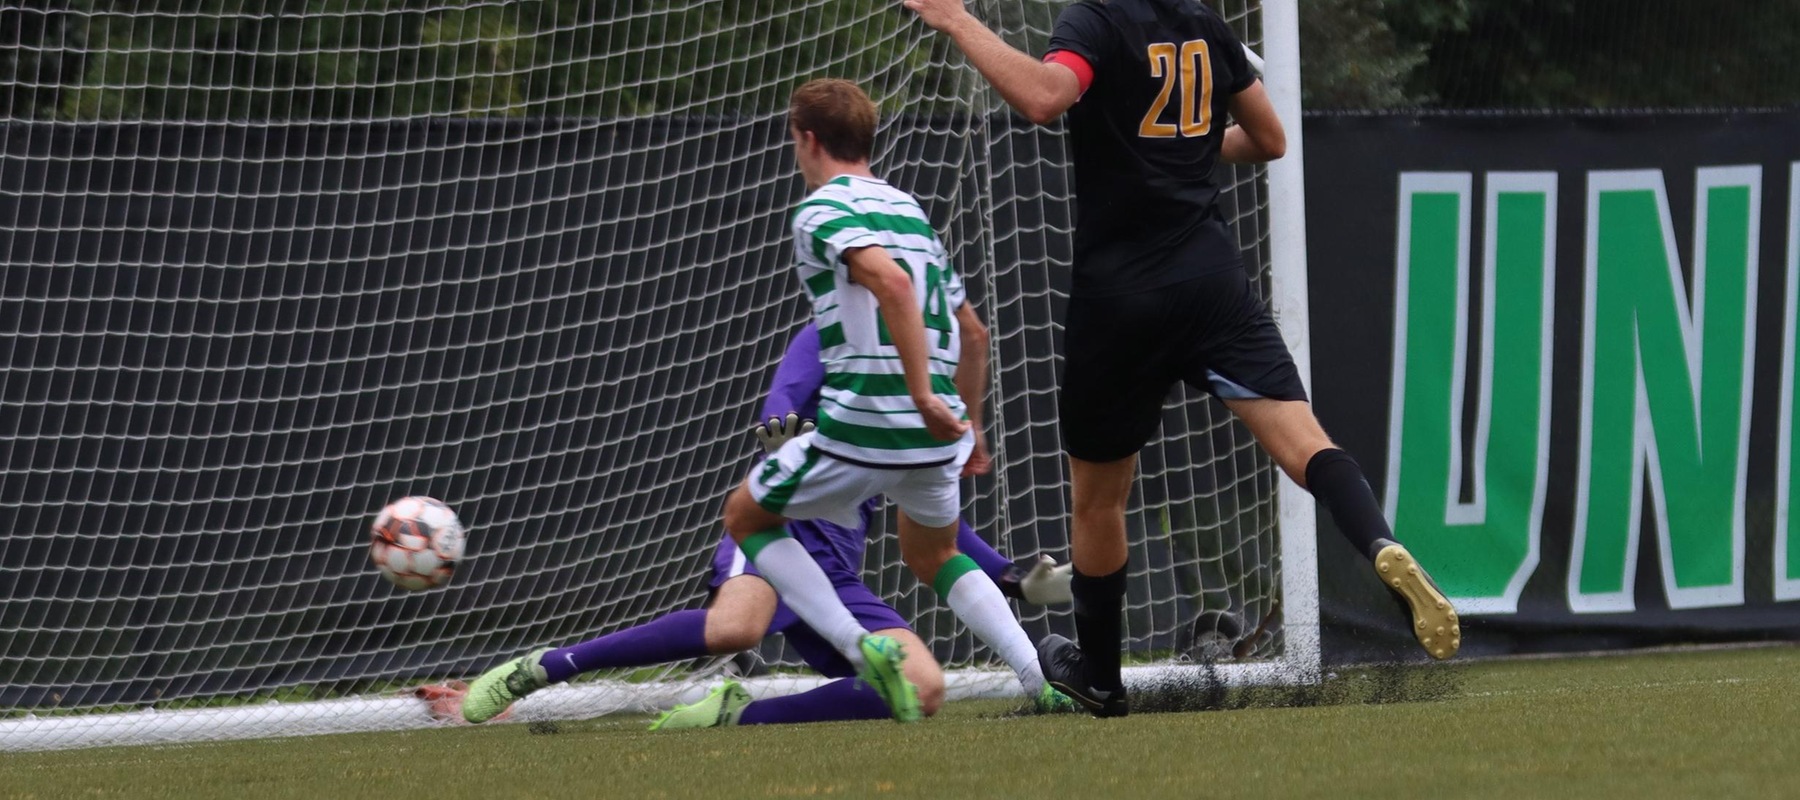 Photo of Marcus Hedemann putting in the eventual game-winning goal in the 84th minute. Copyright 2021; Wilmington University. All rights reserved. Photo by Trudy Spence. September 5, 2021 vs. #15 Adelphi at the WU Athletics Complex.